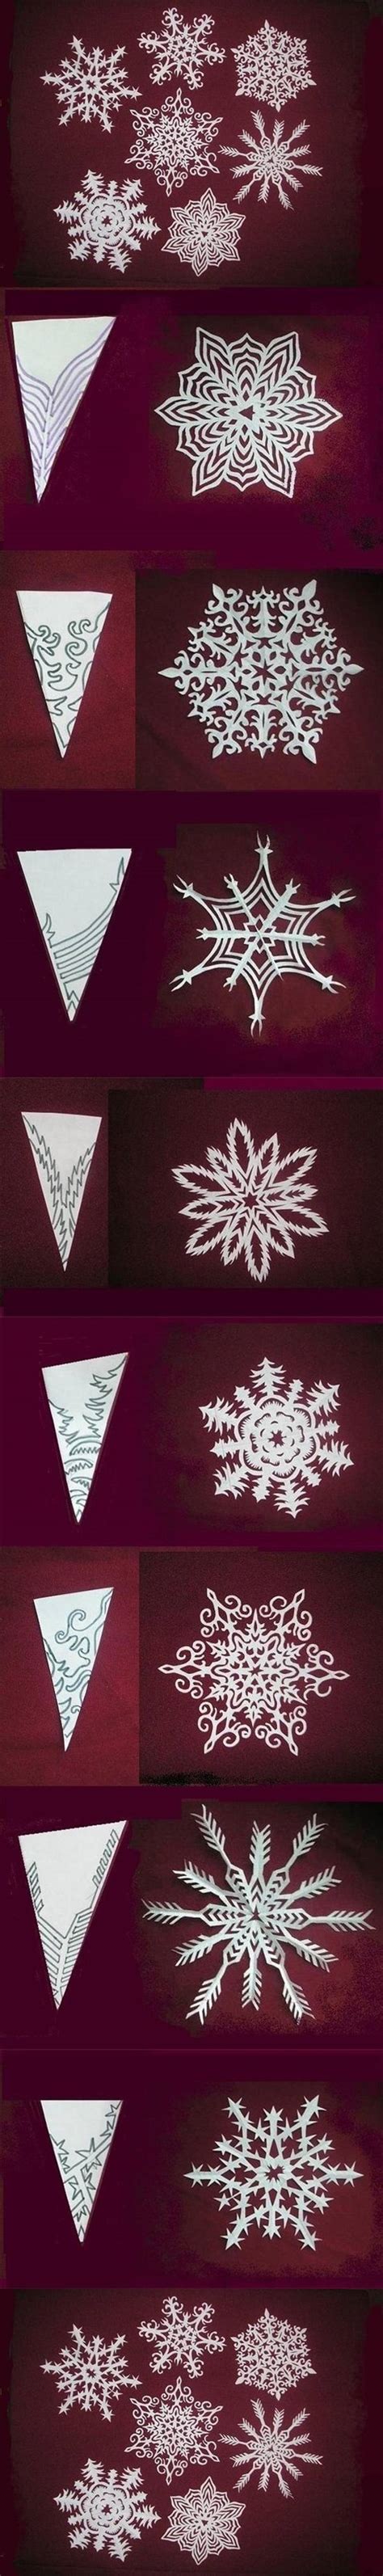 Diy And Crafts Wonderful Diy Paper Snowflakes With Pattern